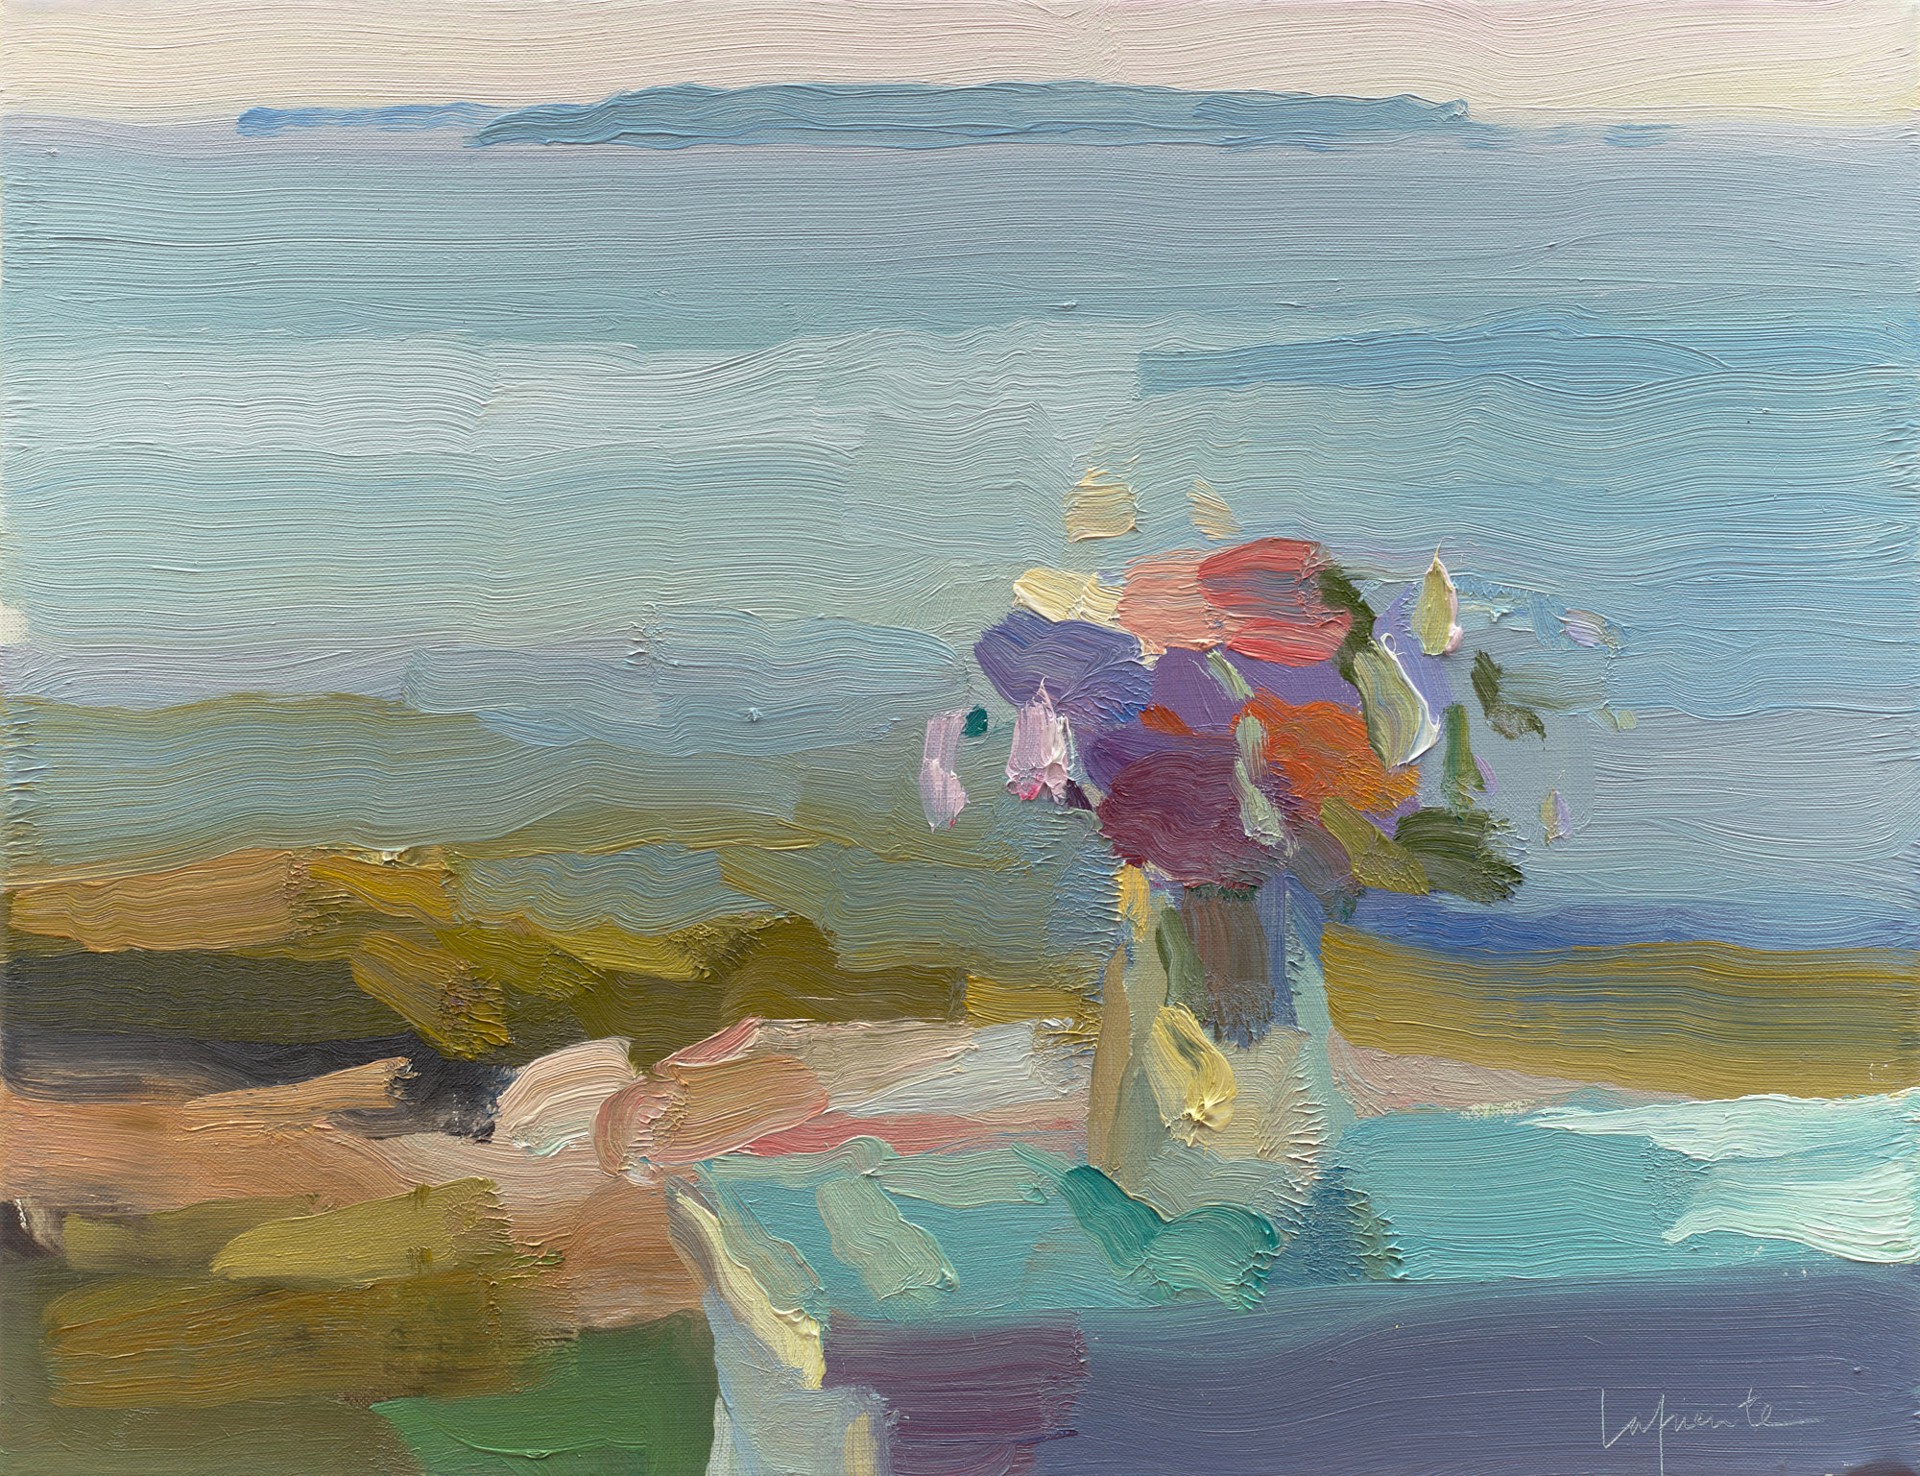 BOUQUET AND THE ISLANDS by CHRISTINE LAFUENTE